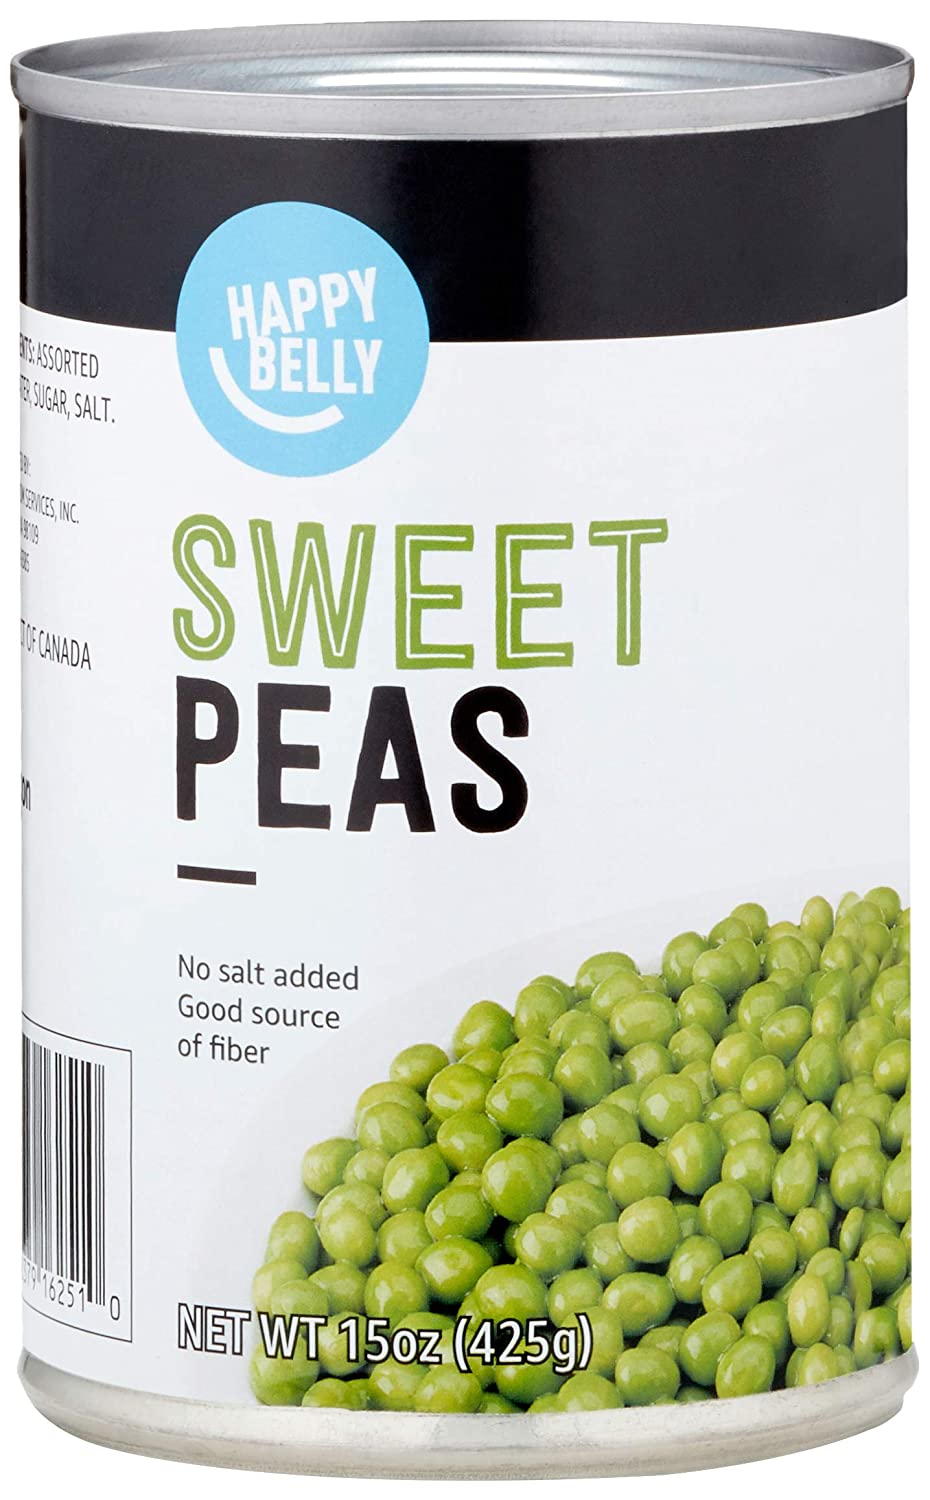 15-Oz Amazon Brand Happy Belly Sweet Peas (No Salt Added) $0.75 + Free Shipping w/ Prime or on orders $25+